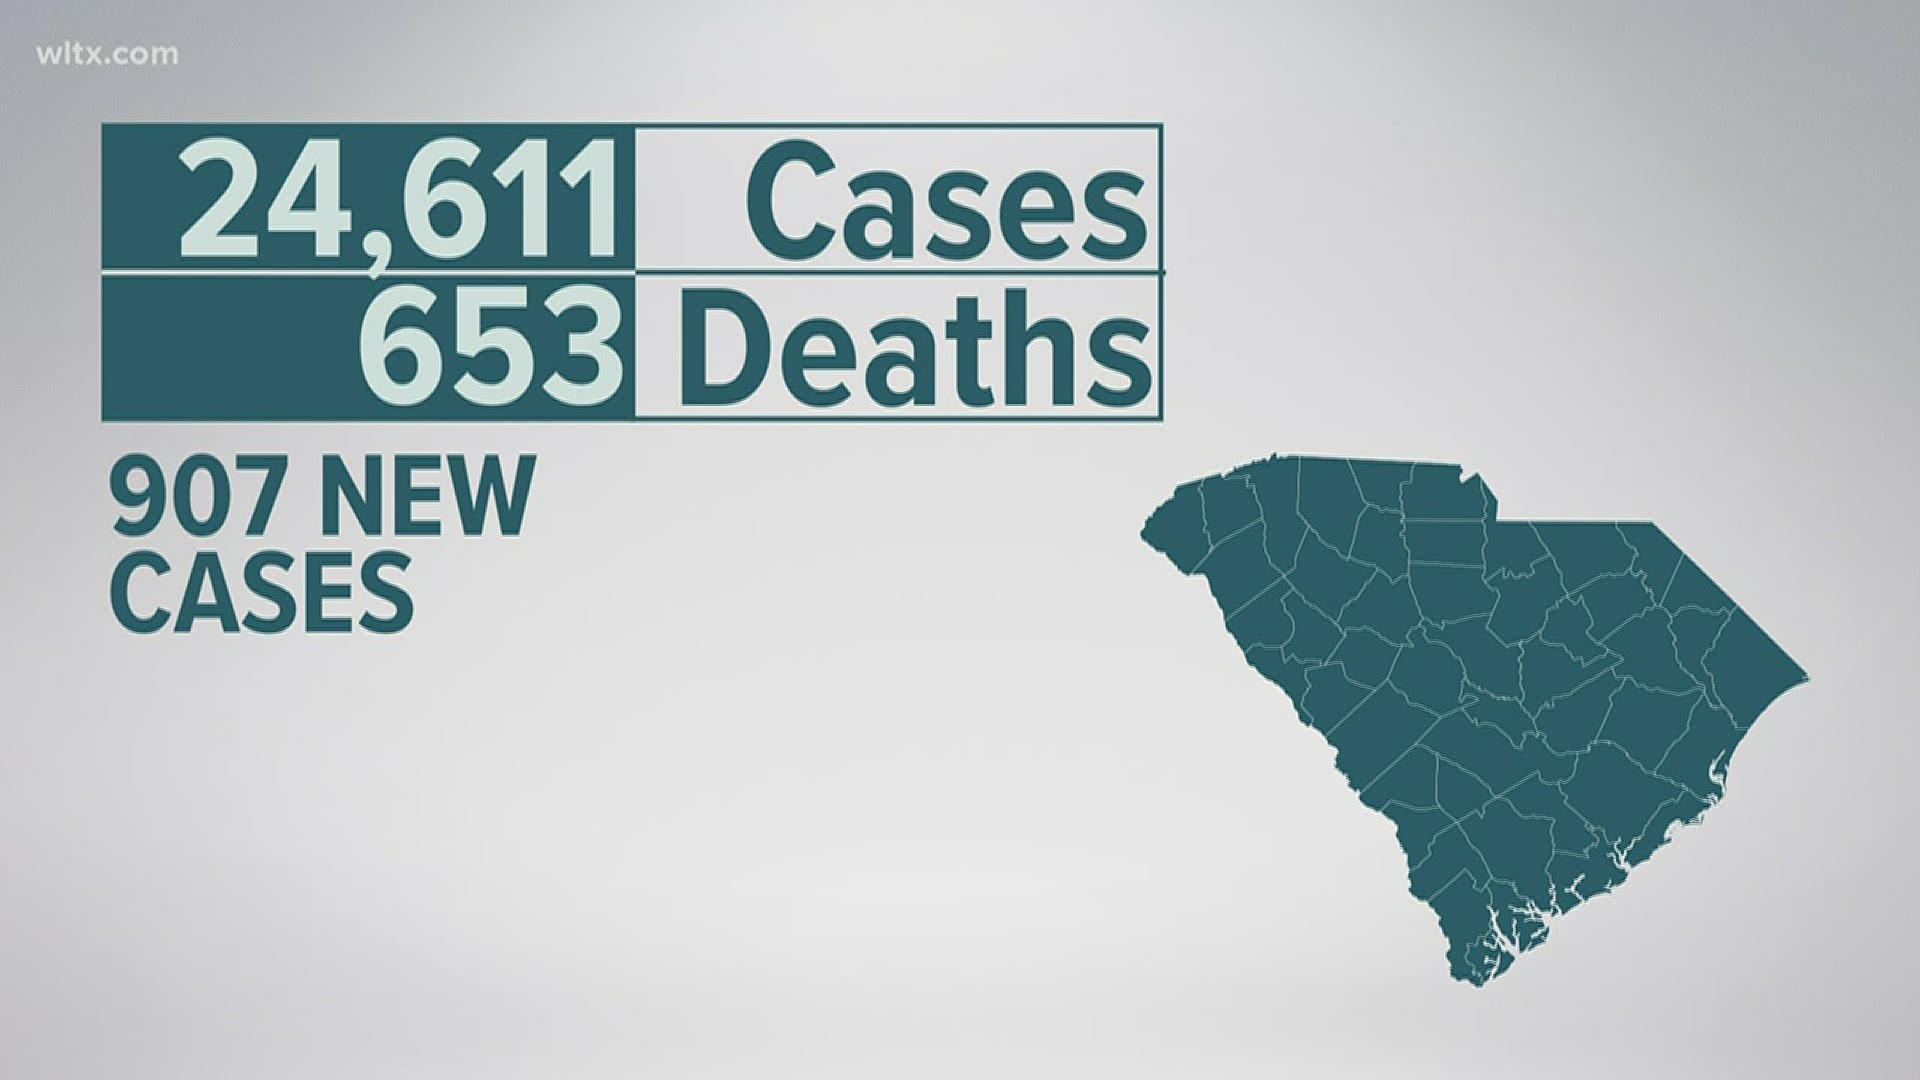 This brings the total number of people confirmed cases to 24,661, probable cases to 32, confirmed deaths to 653, and zero probable deaths